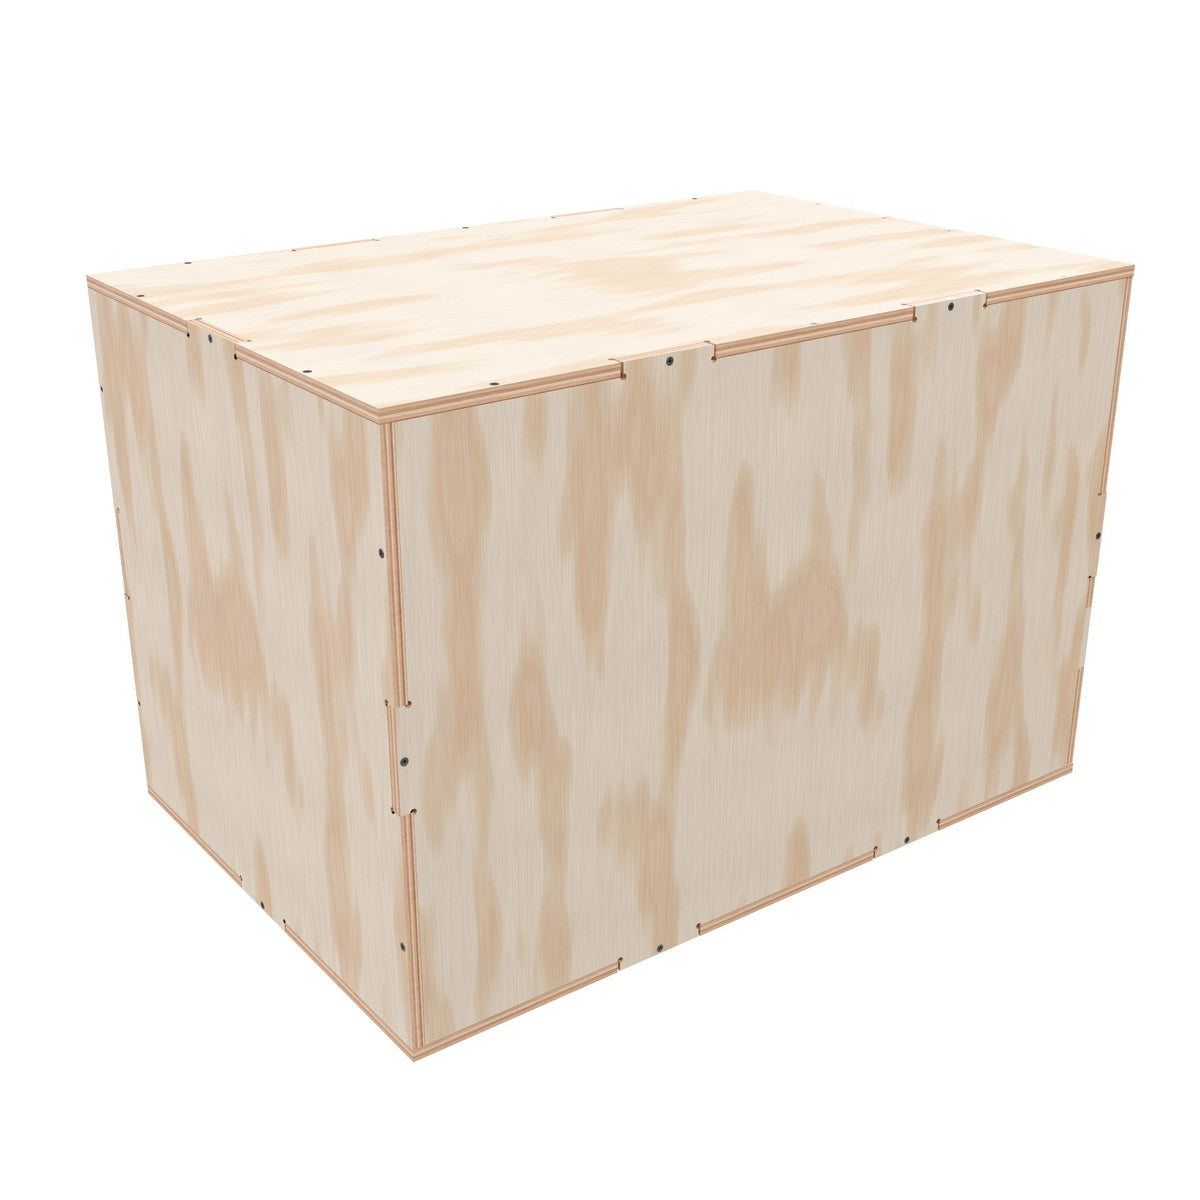 Plywood Shipping Crate 36x24x24